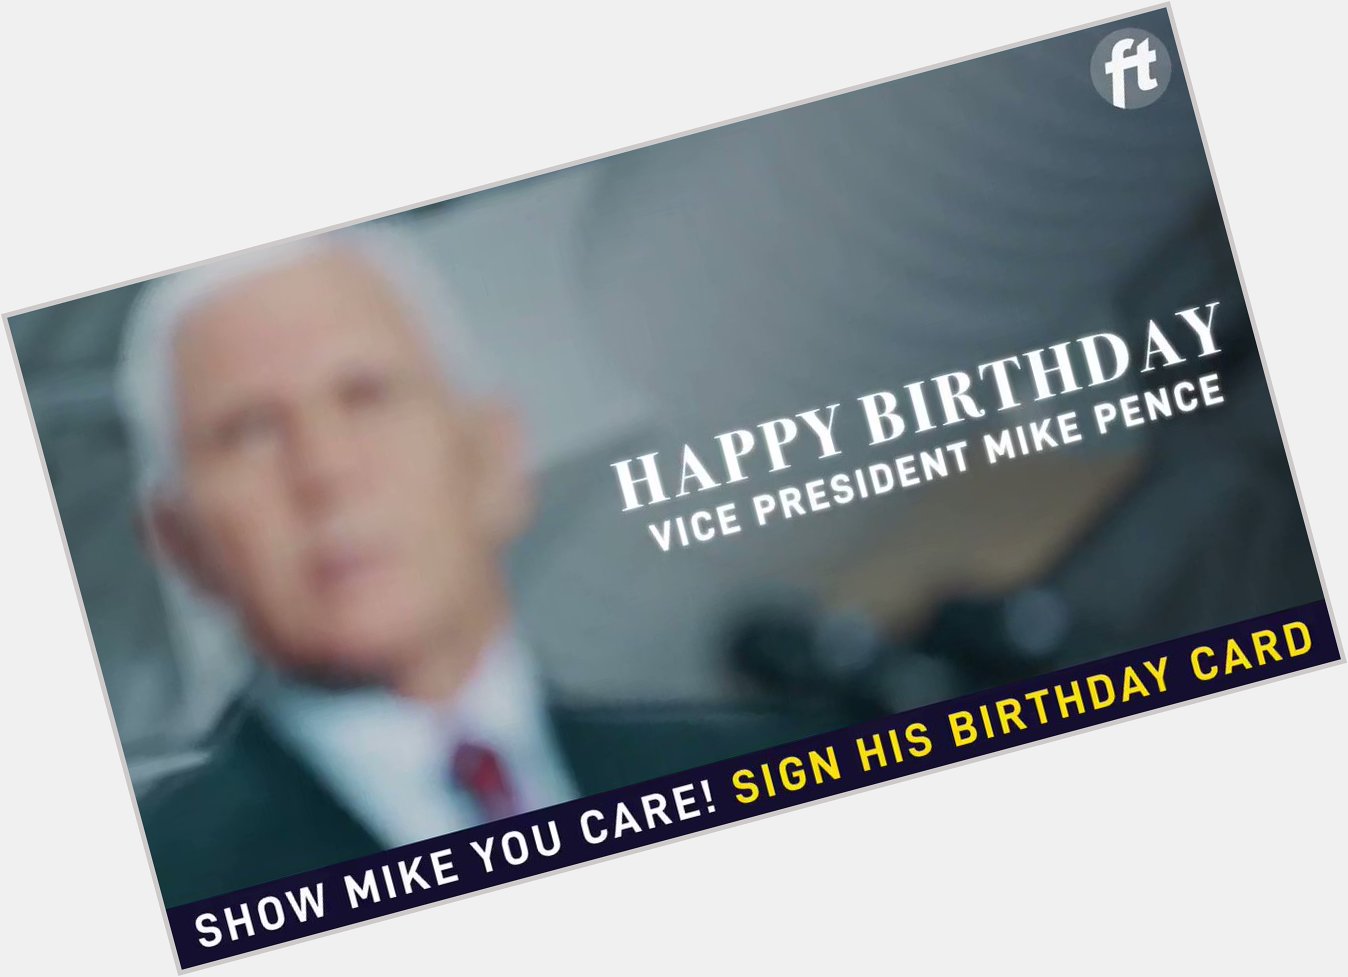 Today we are wishing Mike Pence a VERY Happy Birthday. Sign his card here 